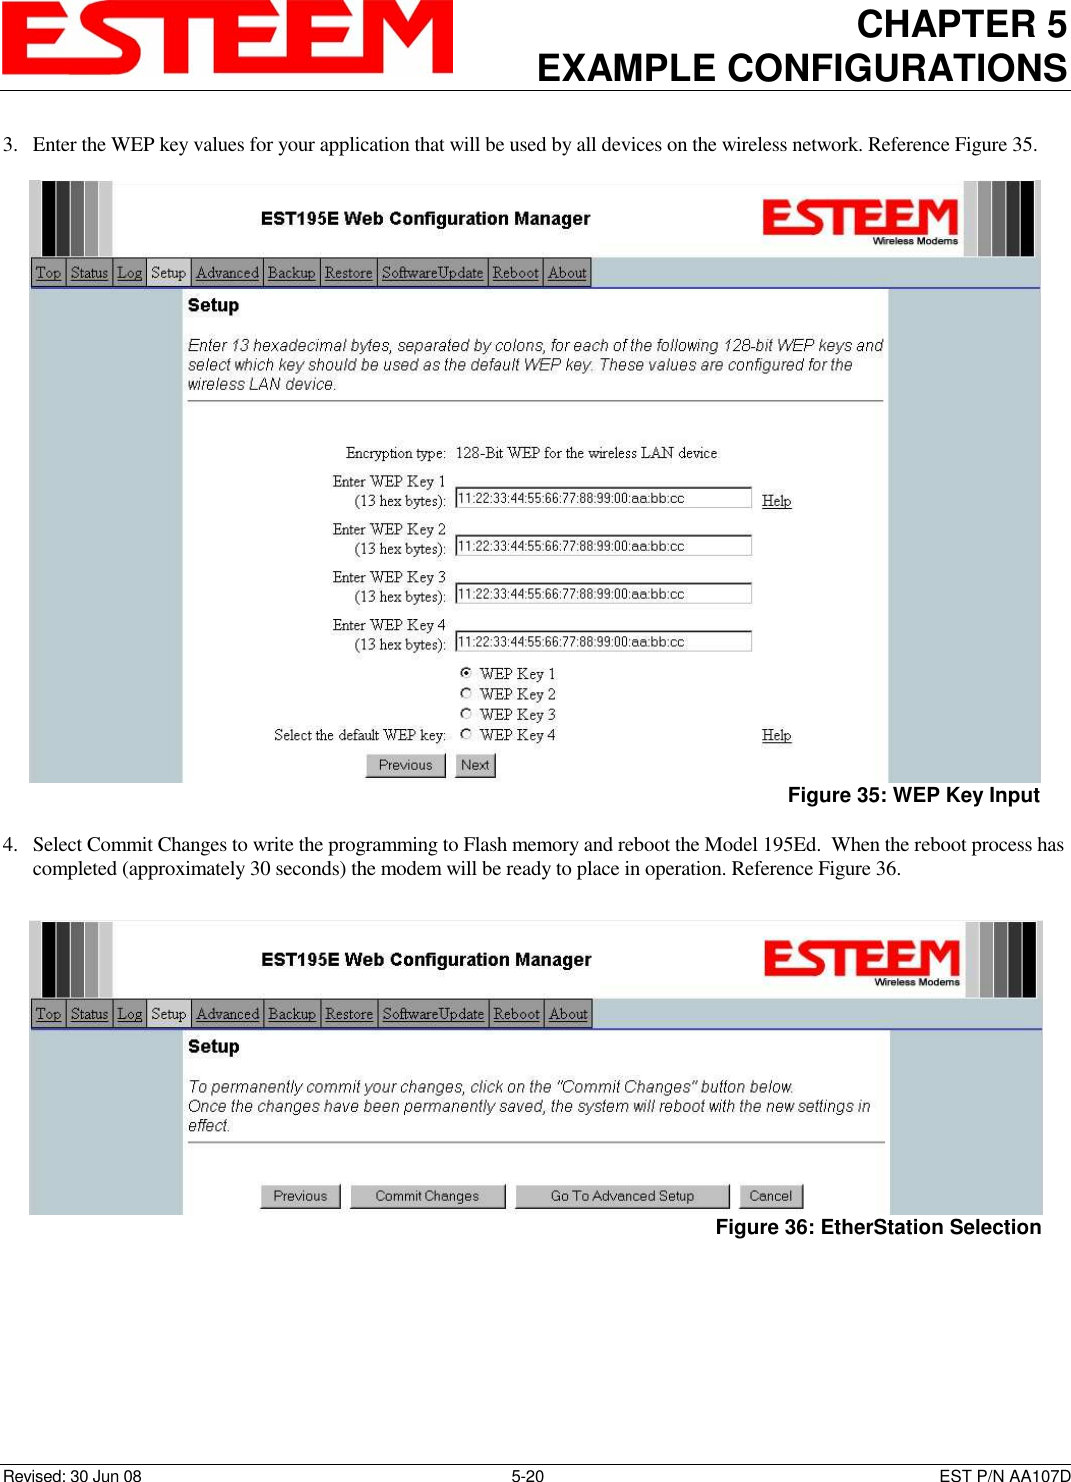 CHAPTER 5 EXAMPLE CONFIGURATIONS    Revised: 30 Jun 08  5-20  EST P/N AA107D 3. Enter the WEP key values for your application that will be used by all devices on the wireless network. Reference Figure 35.  4. Select Commit Changes to write the programming to Flash memory and reboot the Model 195Ed.  When the reboot process has completed (approximately 30 seconds) the modem will be ready to place in operation. Reference Figure 36.   Figure 35: WEP Key Input  Figure 36: EtherStation Selection 